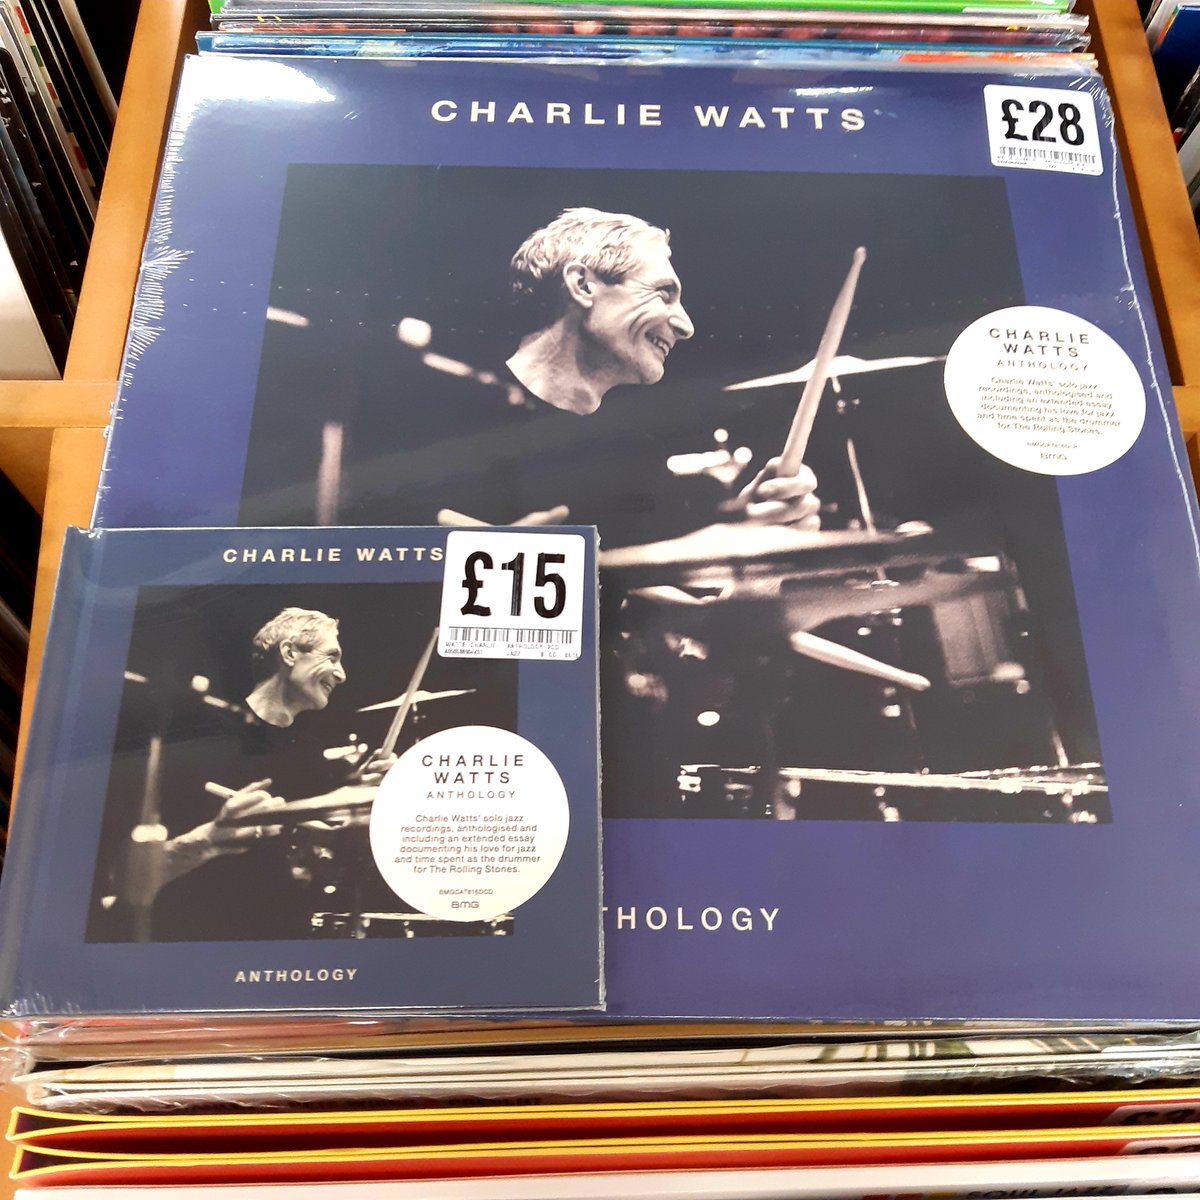 NEW MUSIC FRIDAY

• @GrianChatten - #ChaosForTheFly
• @oliviadeano - #Messy
• @NBThieves - #DeadClubCity
• #CharlieWatts - #Anthology

#gettofopp #vinyl #CD #recordshop #vinylrecords